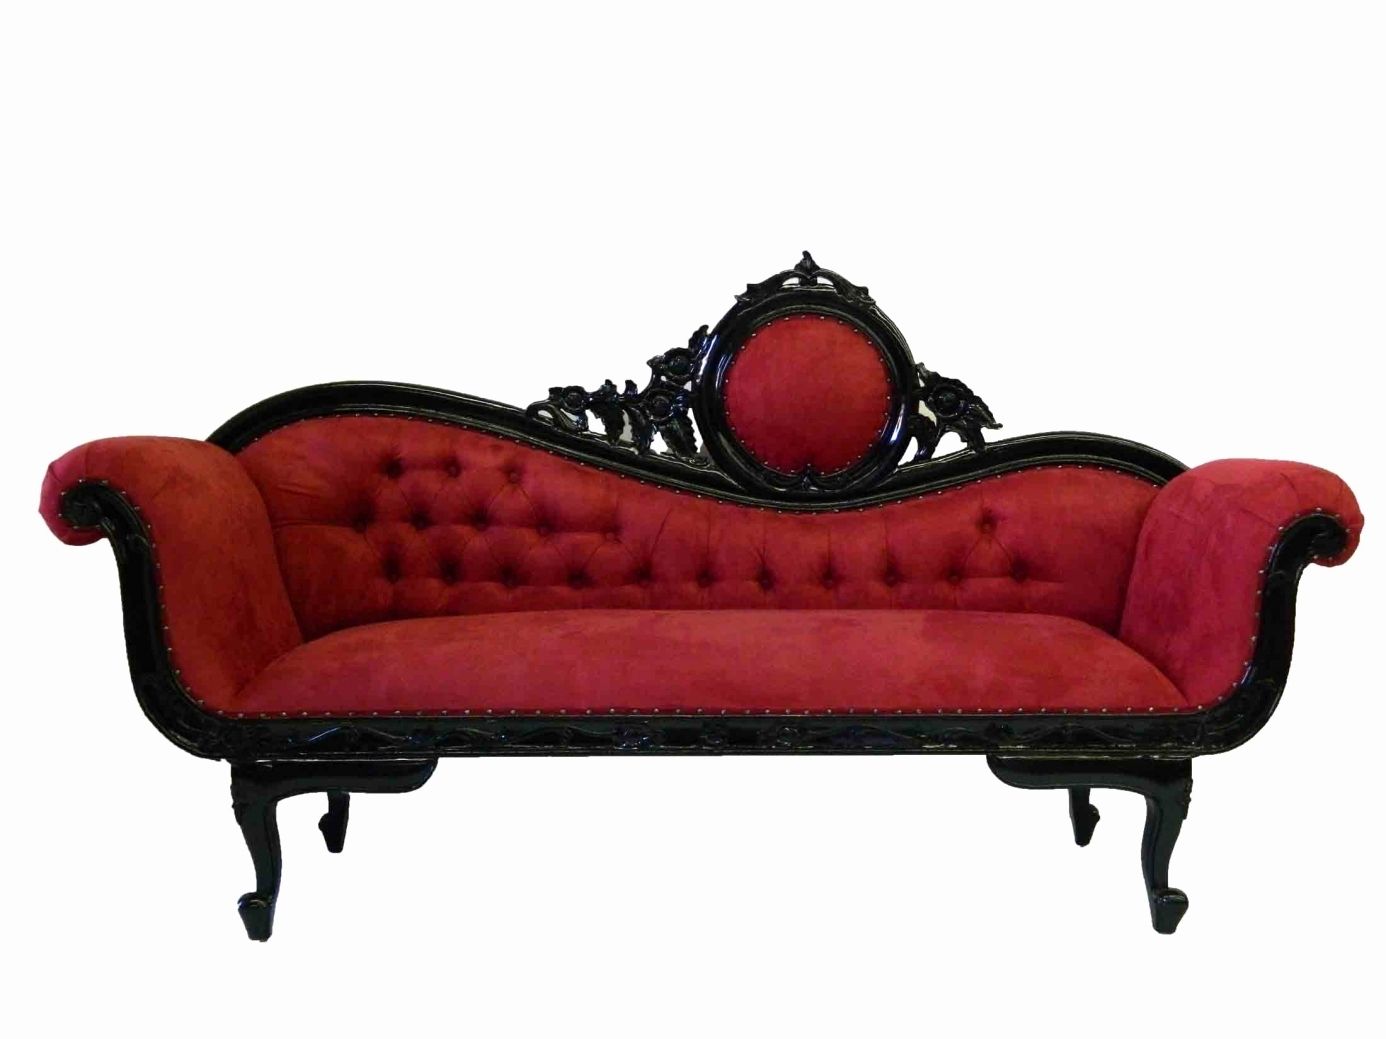 Trendy Black Indoors Chaise Lounge Chairs Inside Indoor Chaise Lounge Chairs Ineffable Red Leather Sofa Chaise (View 5 of 15)